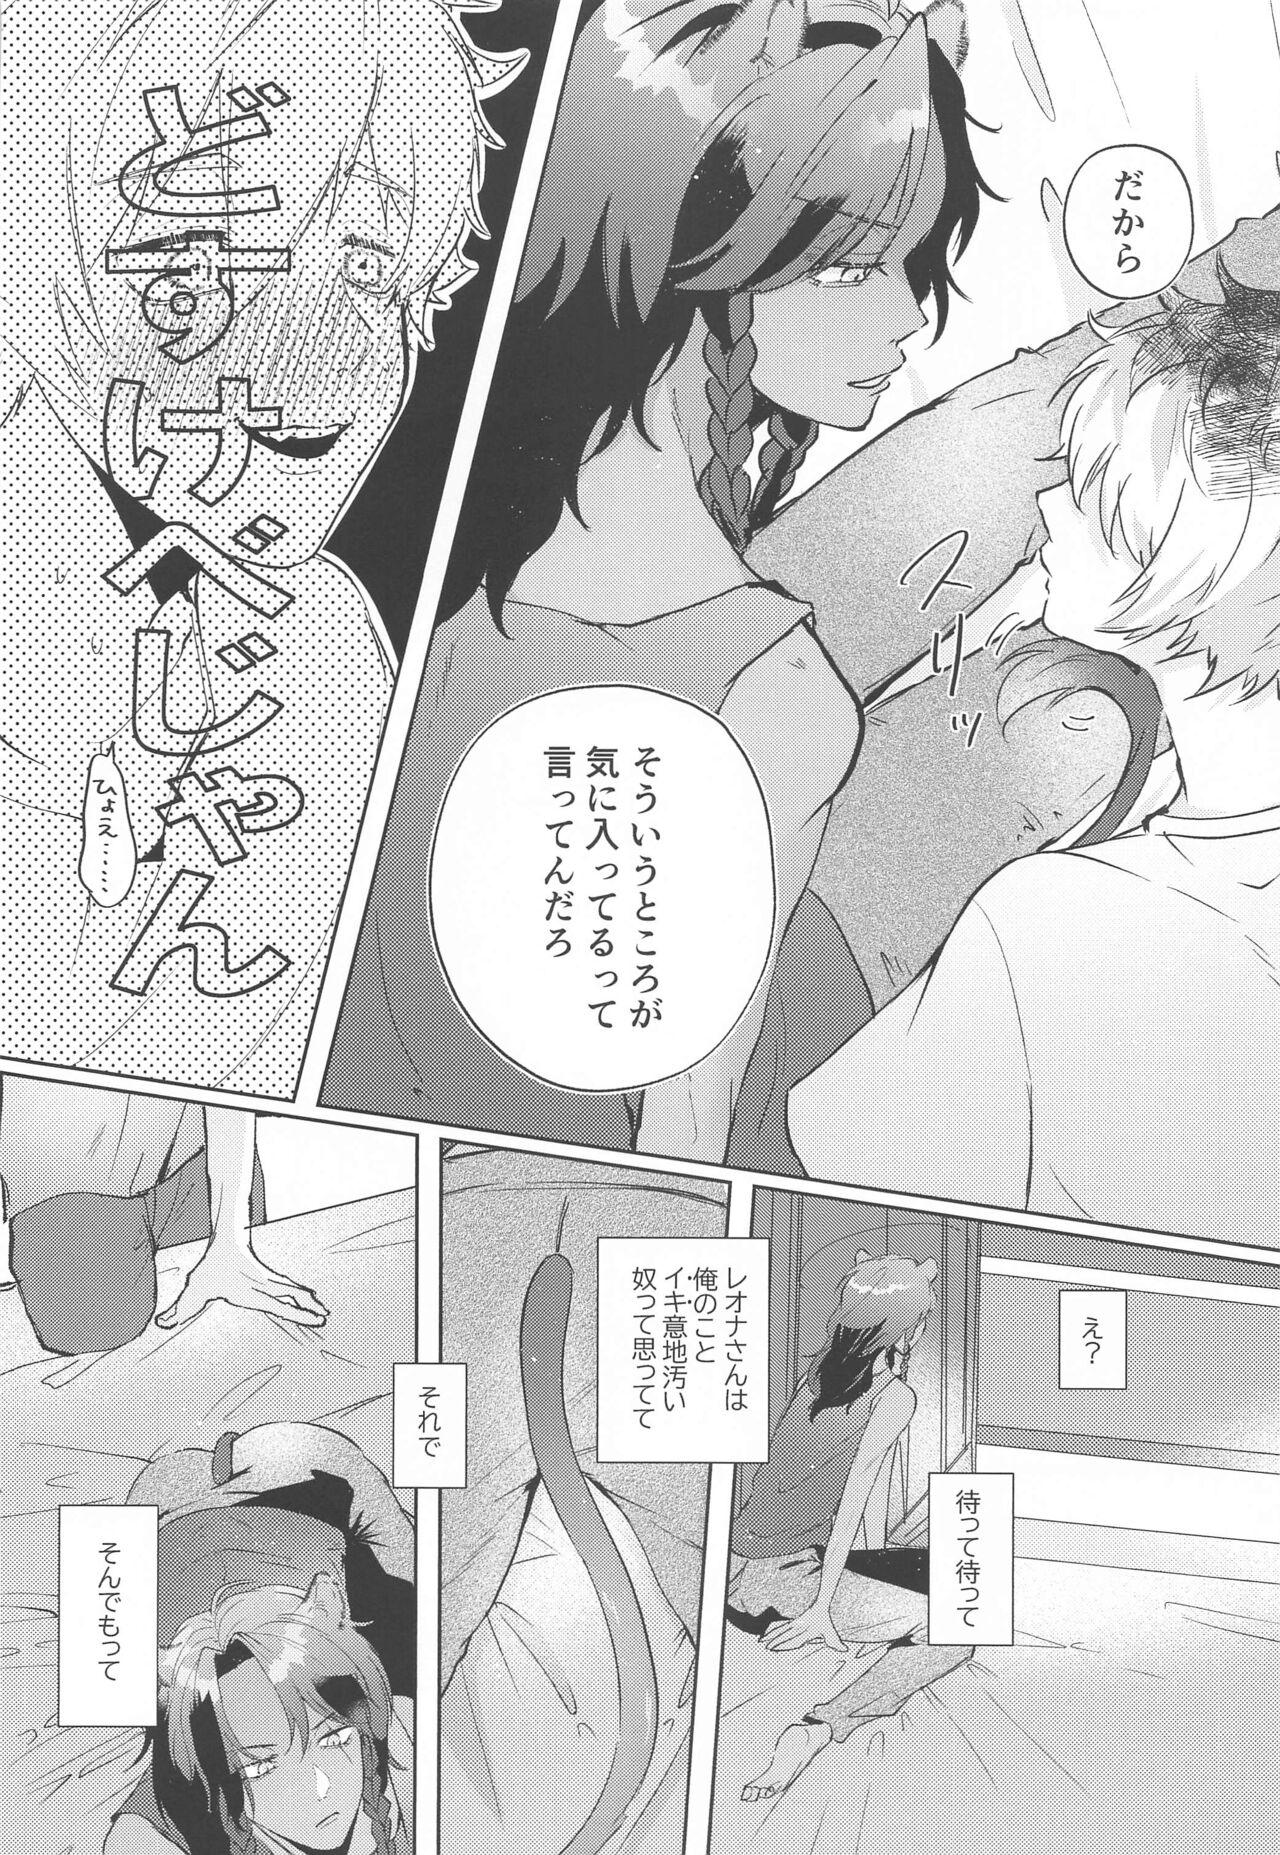 Gorgeous Kanchigai Over Run!! - over run from a misunderstanding - Disney twisted-wonderland Fisting - Page 9